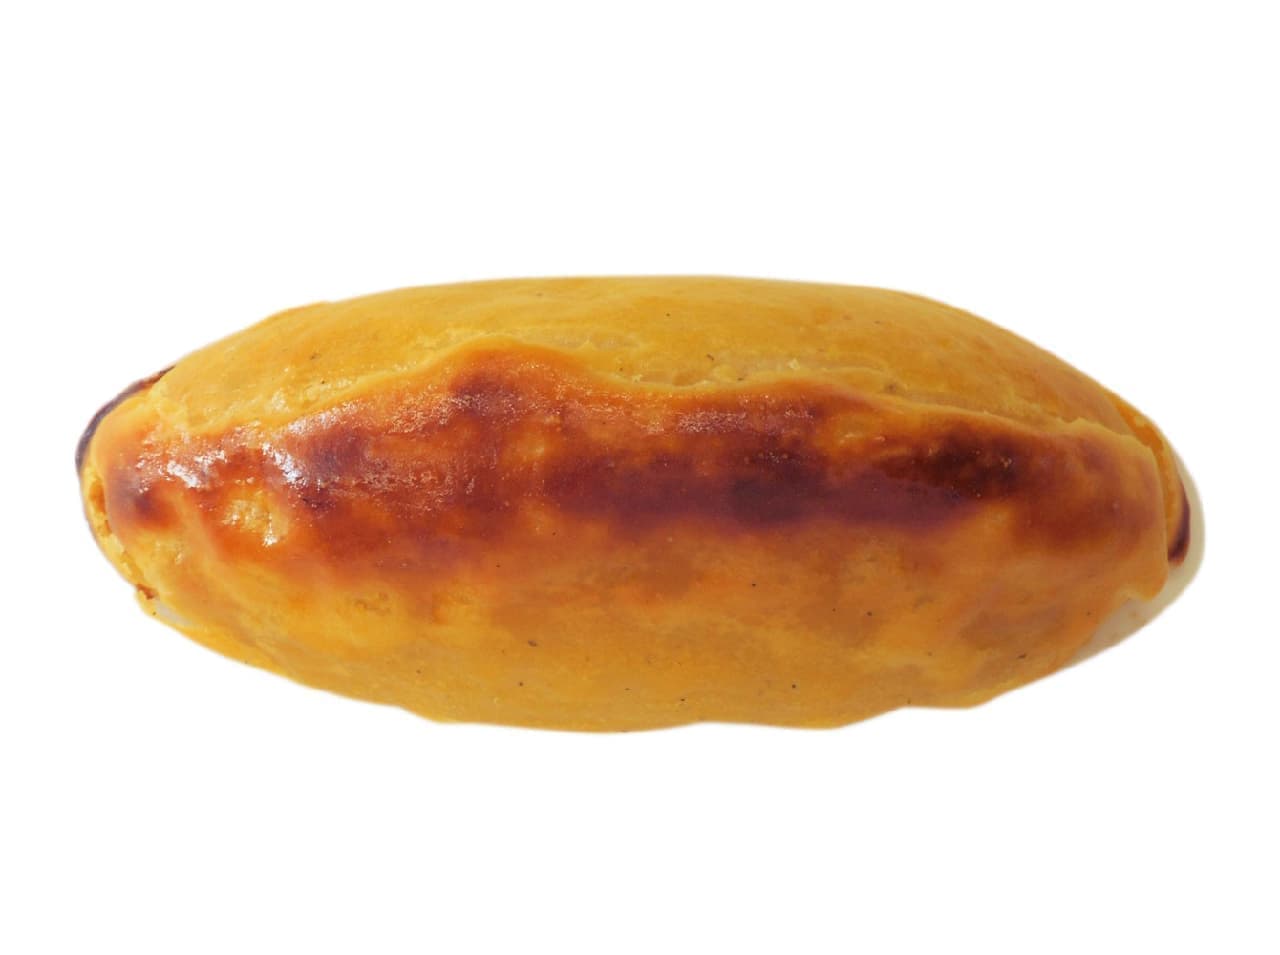 7-ELEVEN "Golden Sweet Potato with Fermented Butter and Vanilla Scent